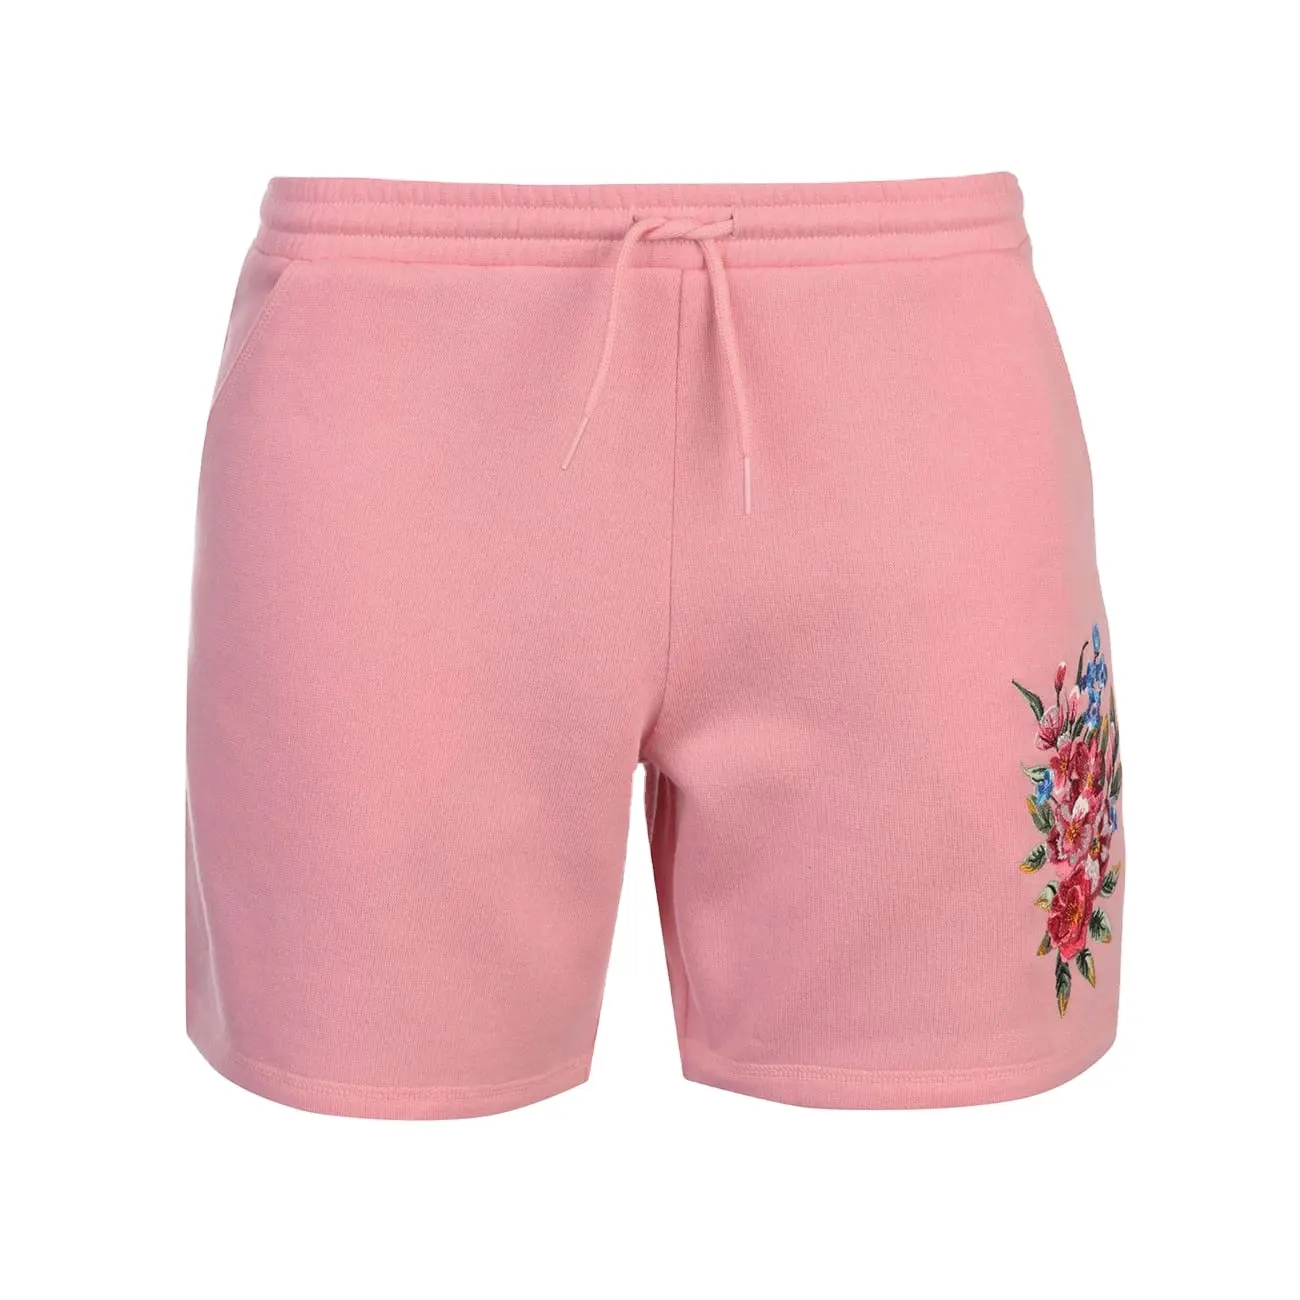 Floral Shorts Ladies 65% Polyester 35% Cotton Elasticated Waistband Drawstring Fastening 2 Open Pockets Gym Women Shorts